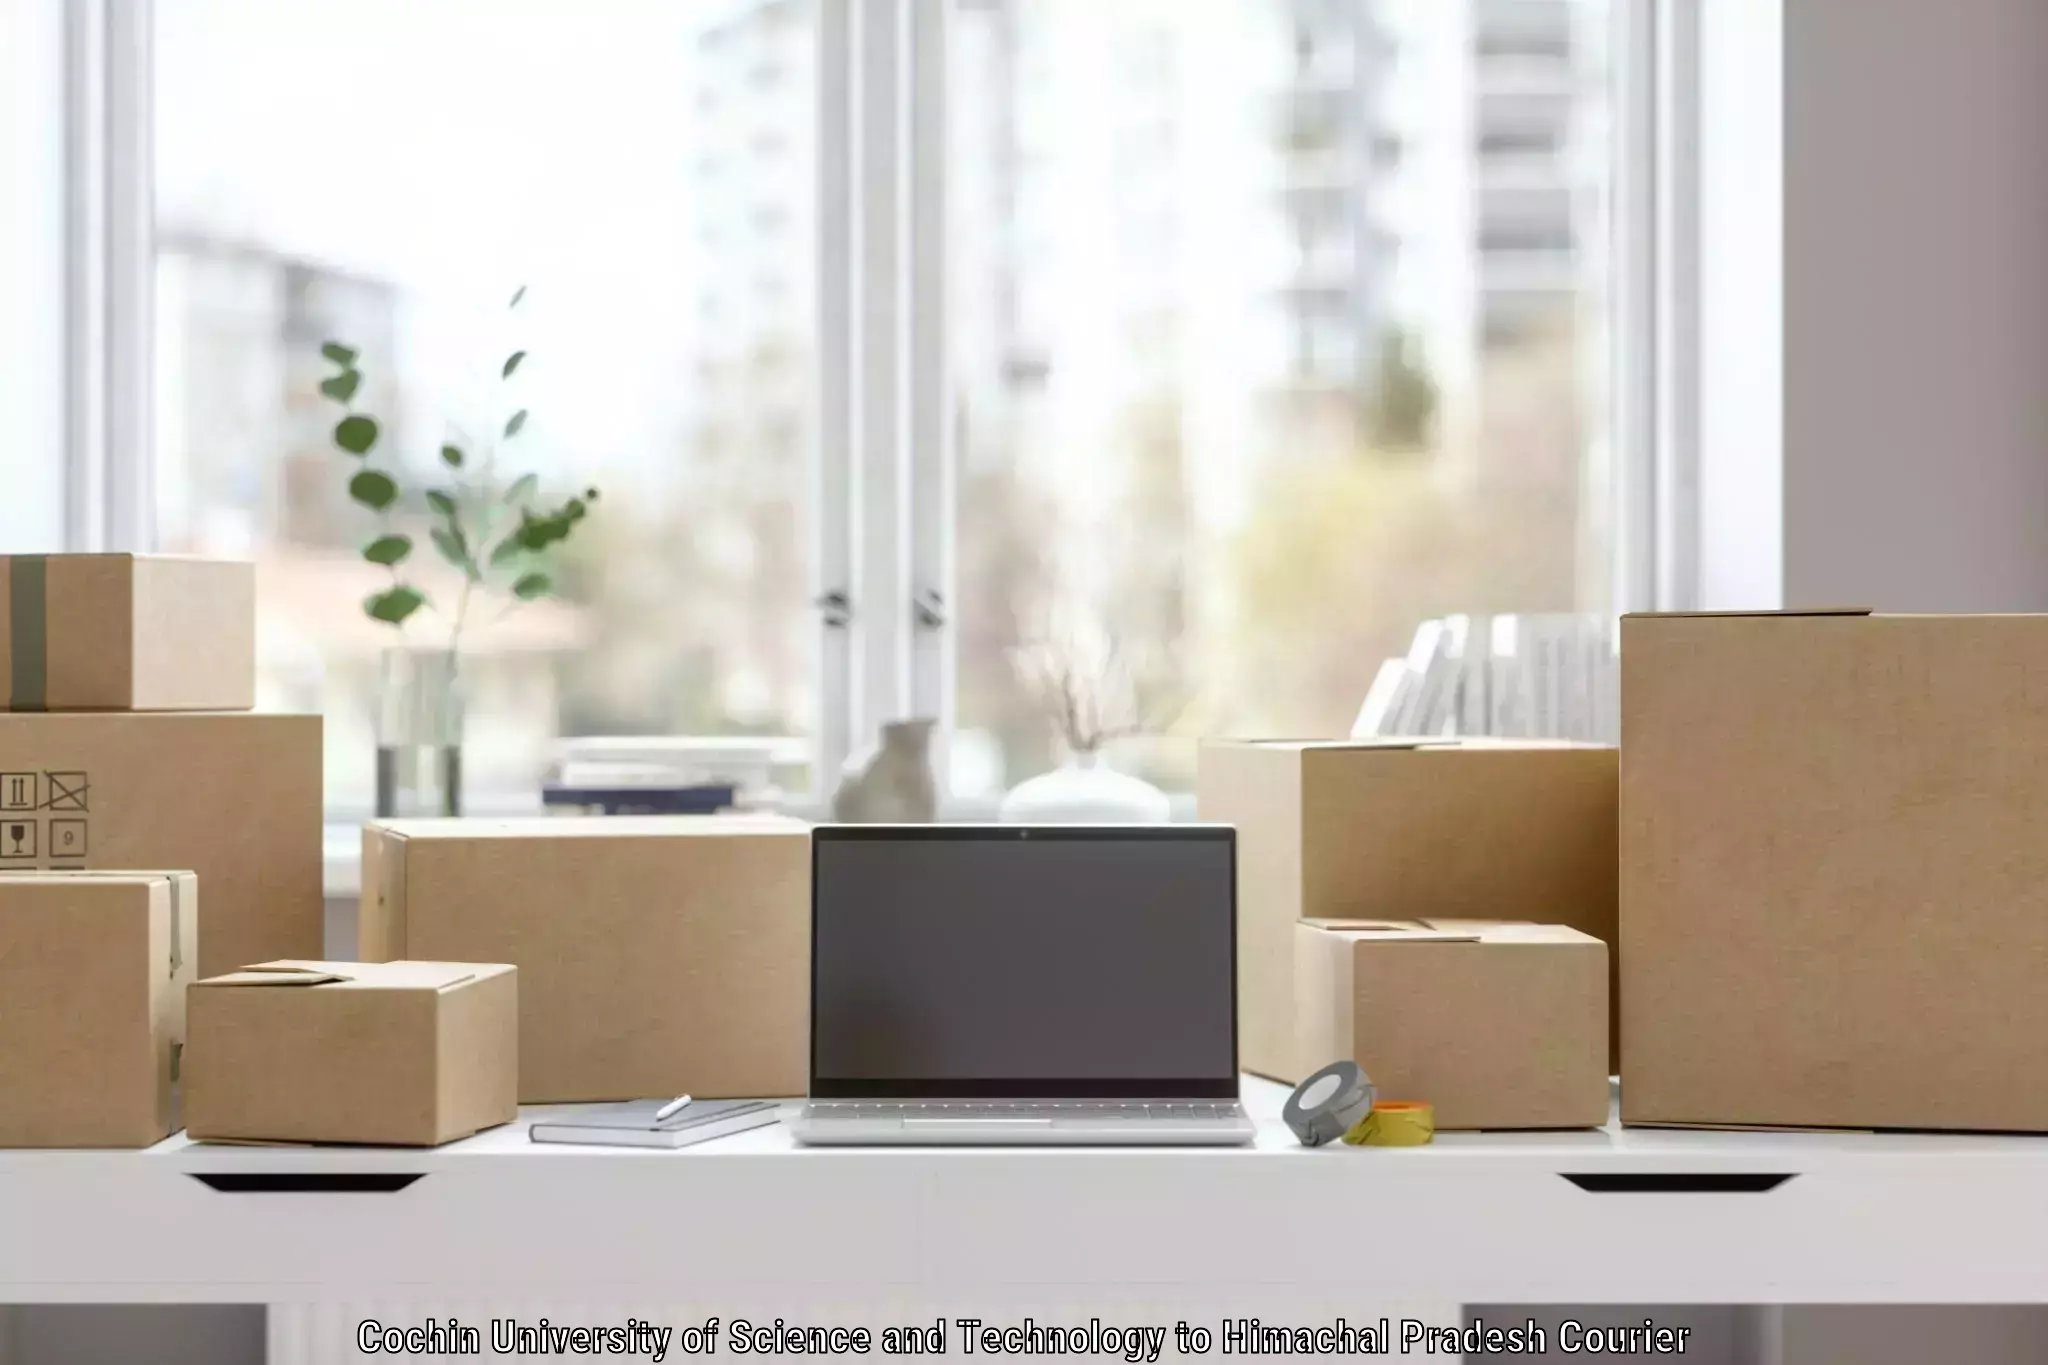 Efficient moving company Cochin University of Science and Technology to Dheera